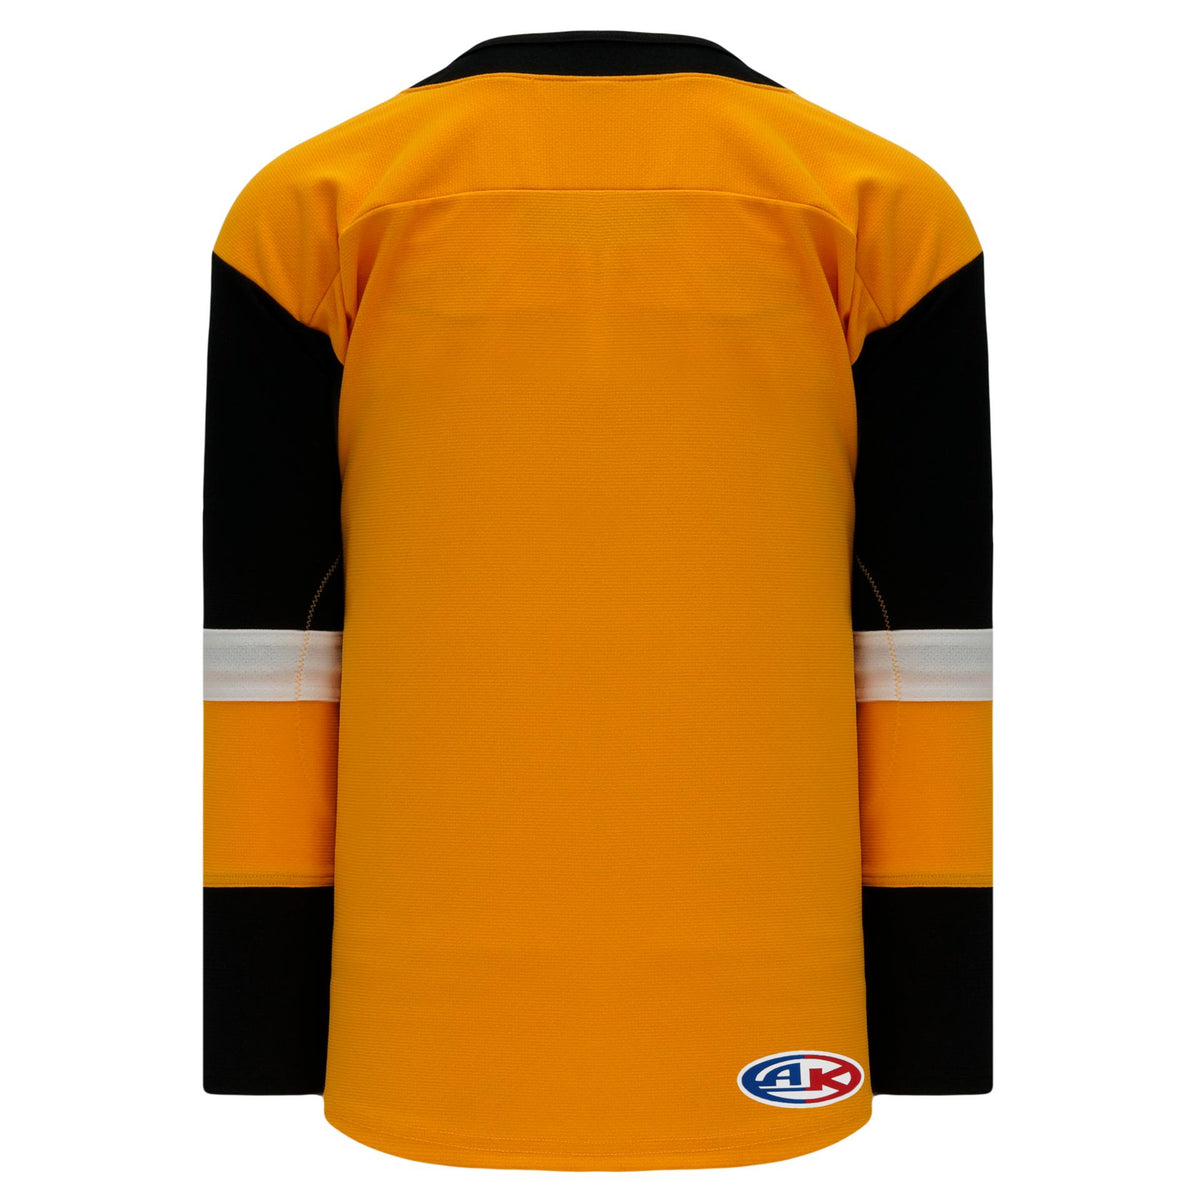 pittsburgh penguins blank jersey